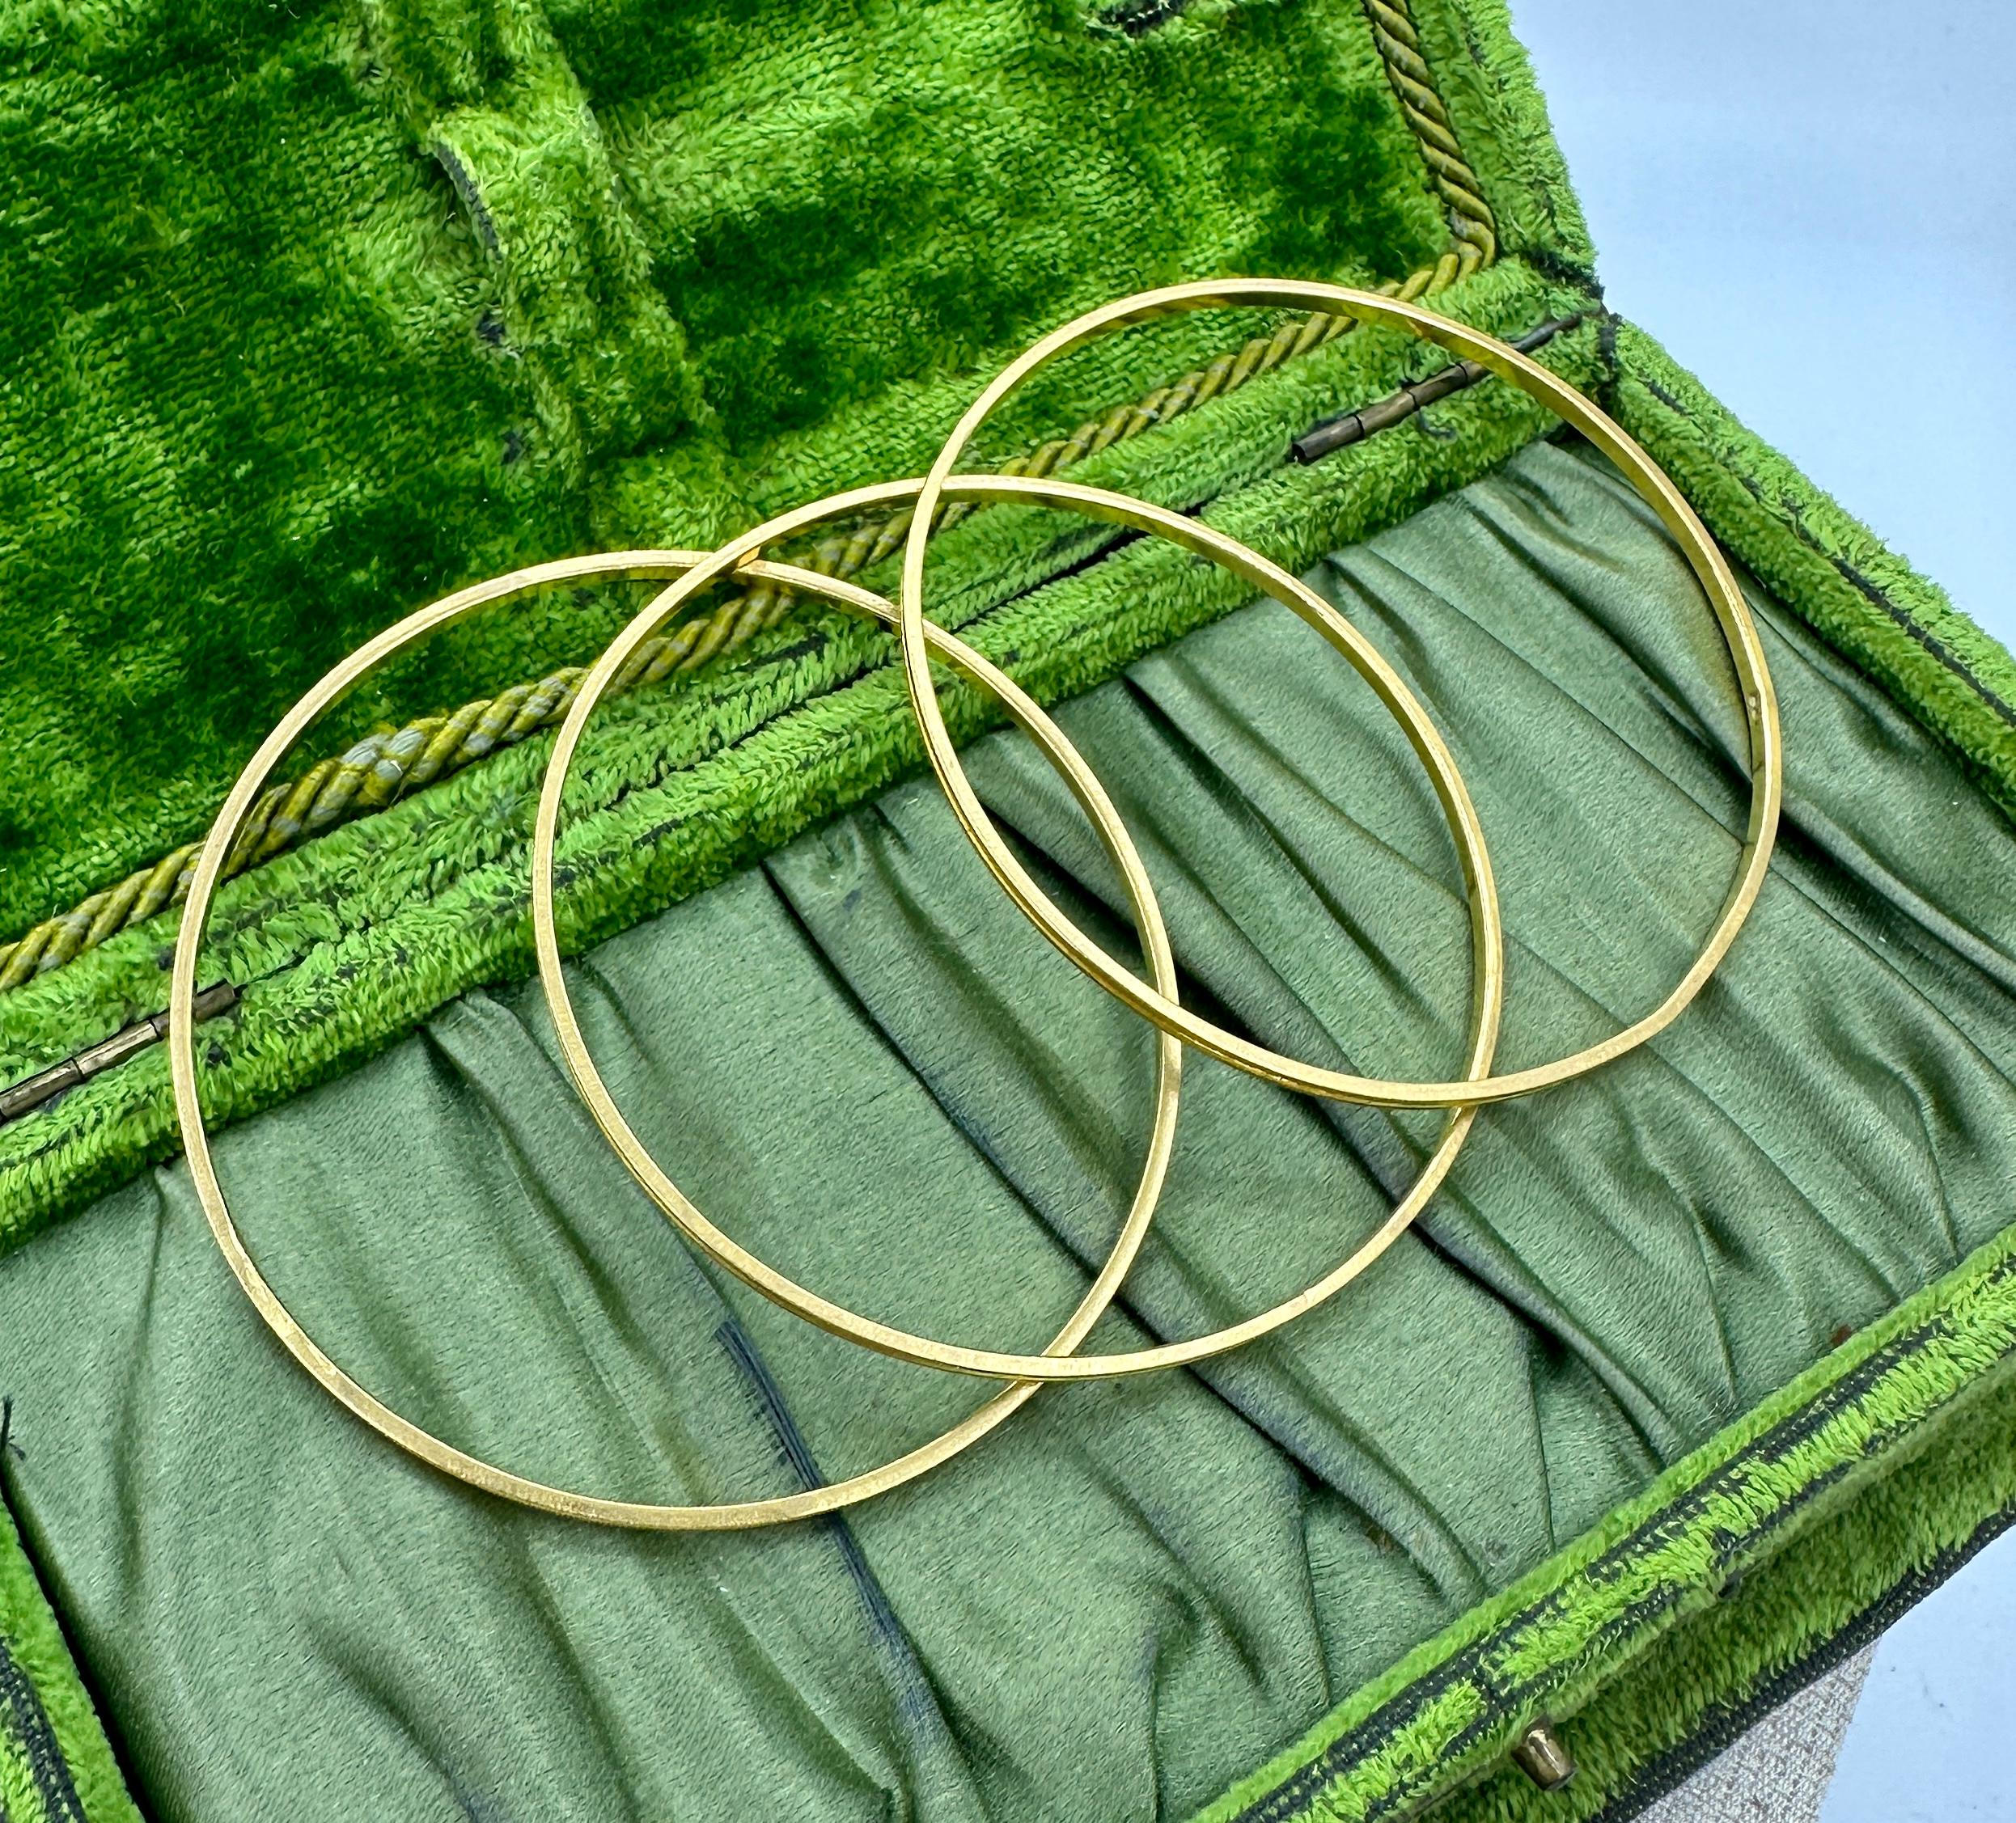 This is a wonderful and classic trio of three Bangle Bracelets in 22 Karat Yellow Gold.  The classic stacking Bracelets have stunning design with rectangular engraving and detailed borders.  The bracelets are period jewels with clean modern lines